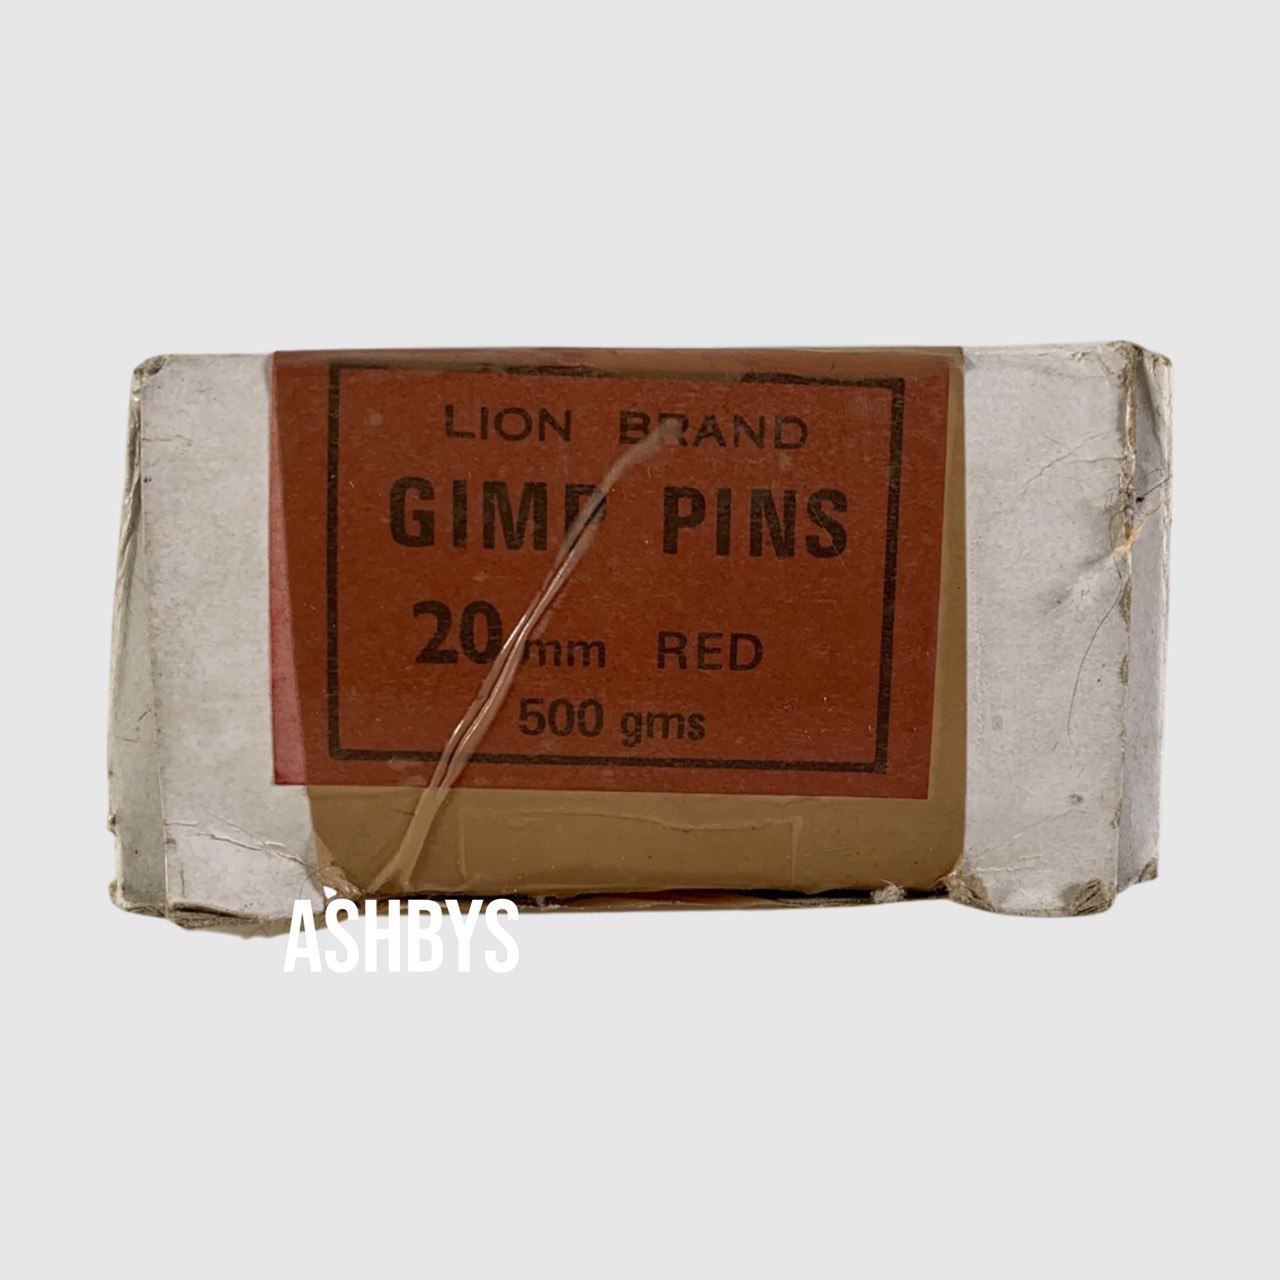 Lion Brand Gimp Pins 20mm Red 500gms (NEW UNUSED OLD STOCK)